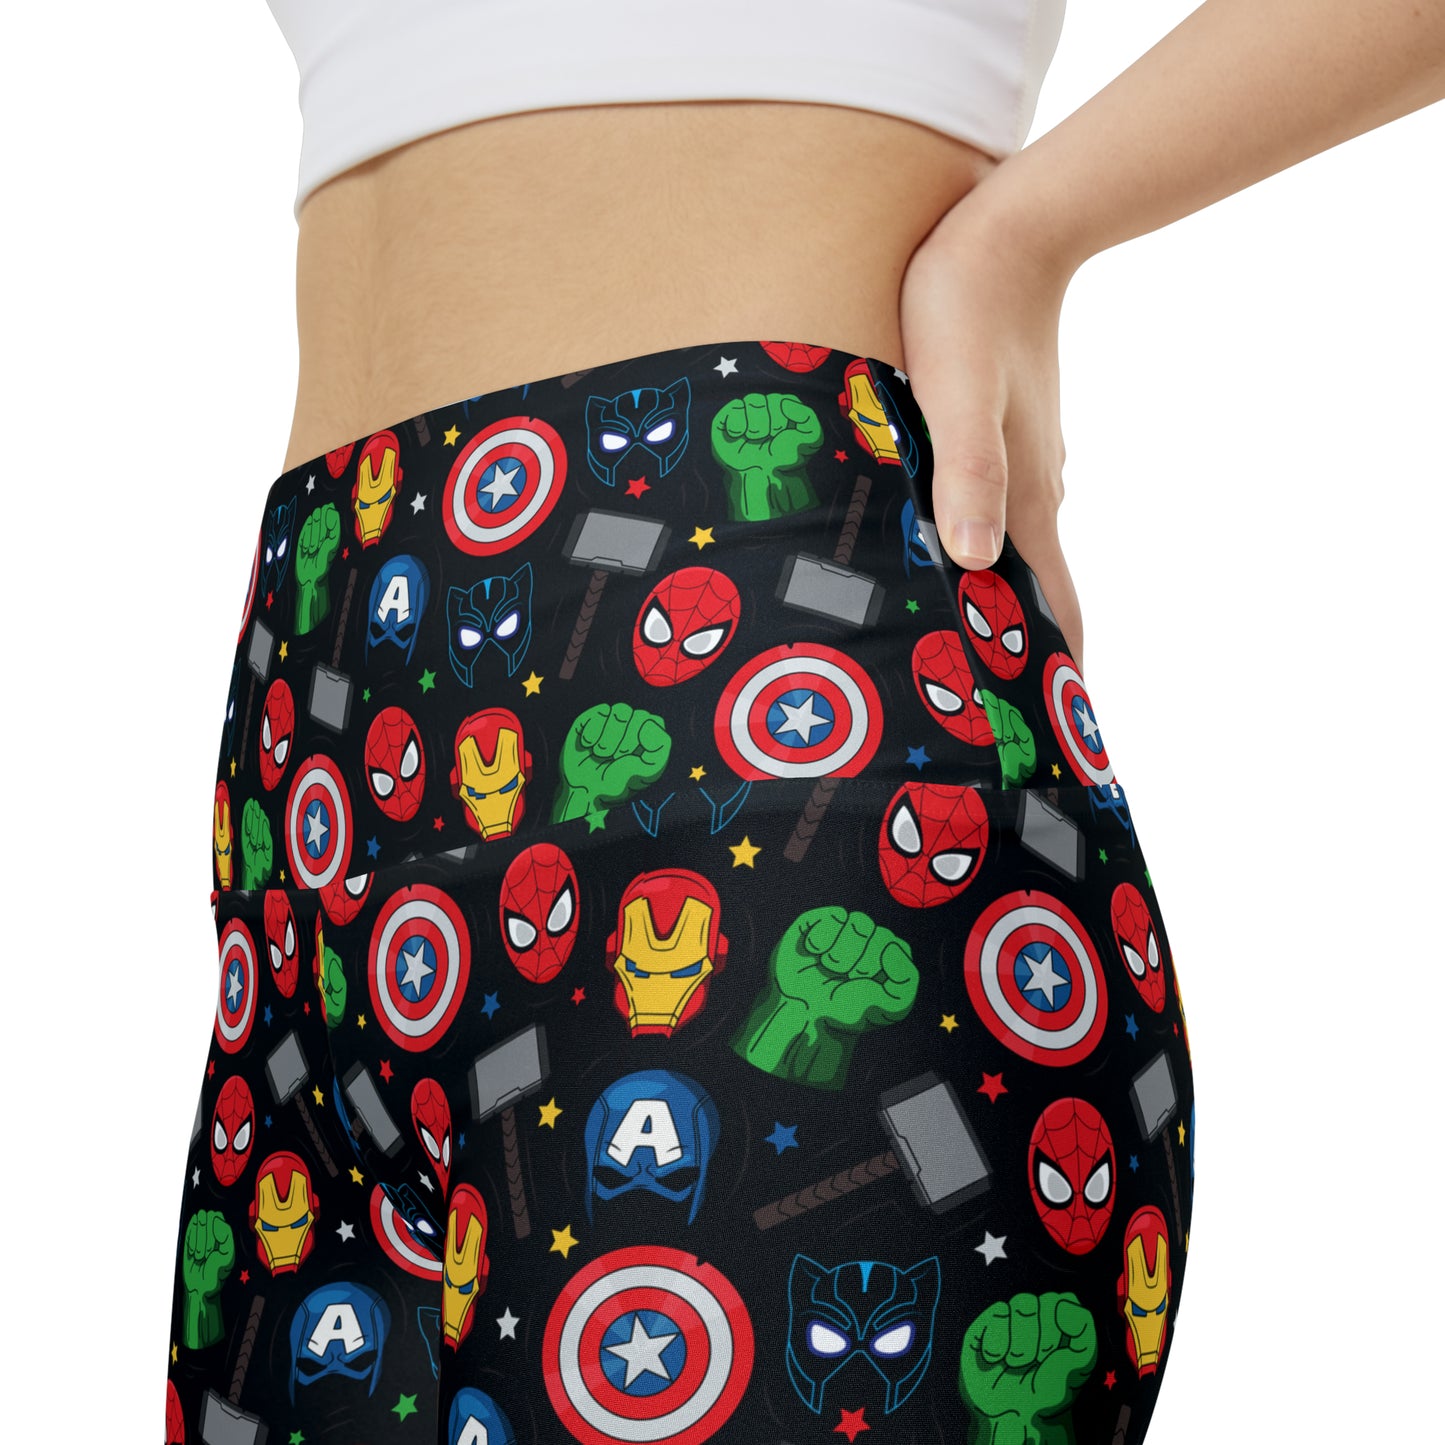 Super Heroes Women's Athletic Workout Shorts